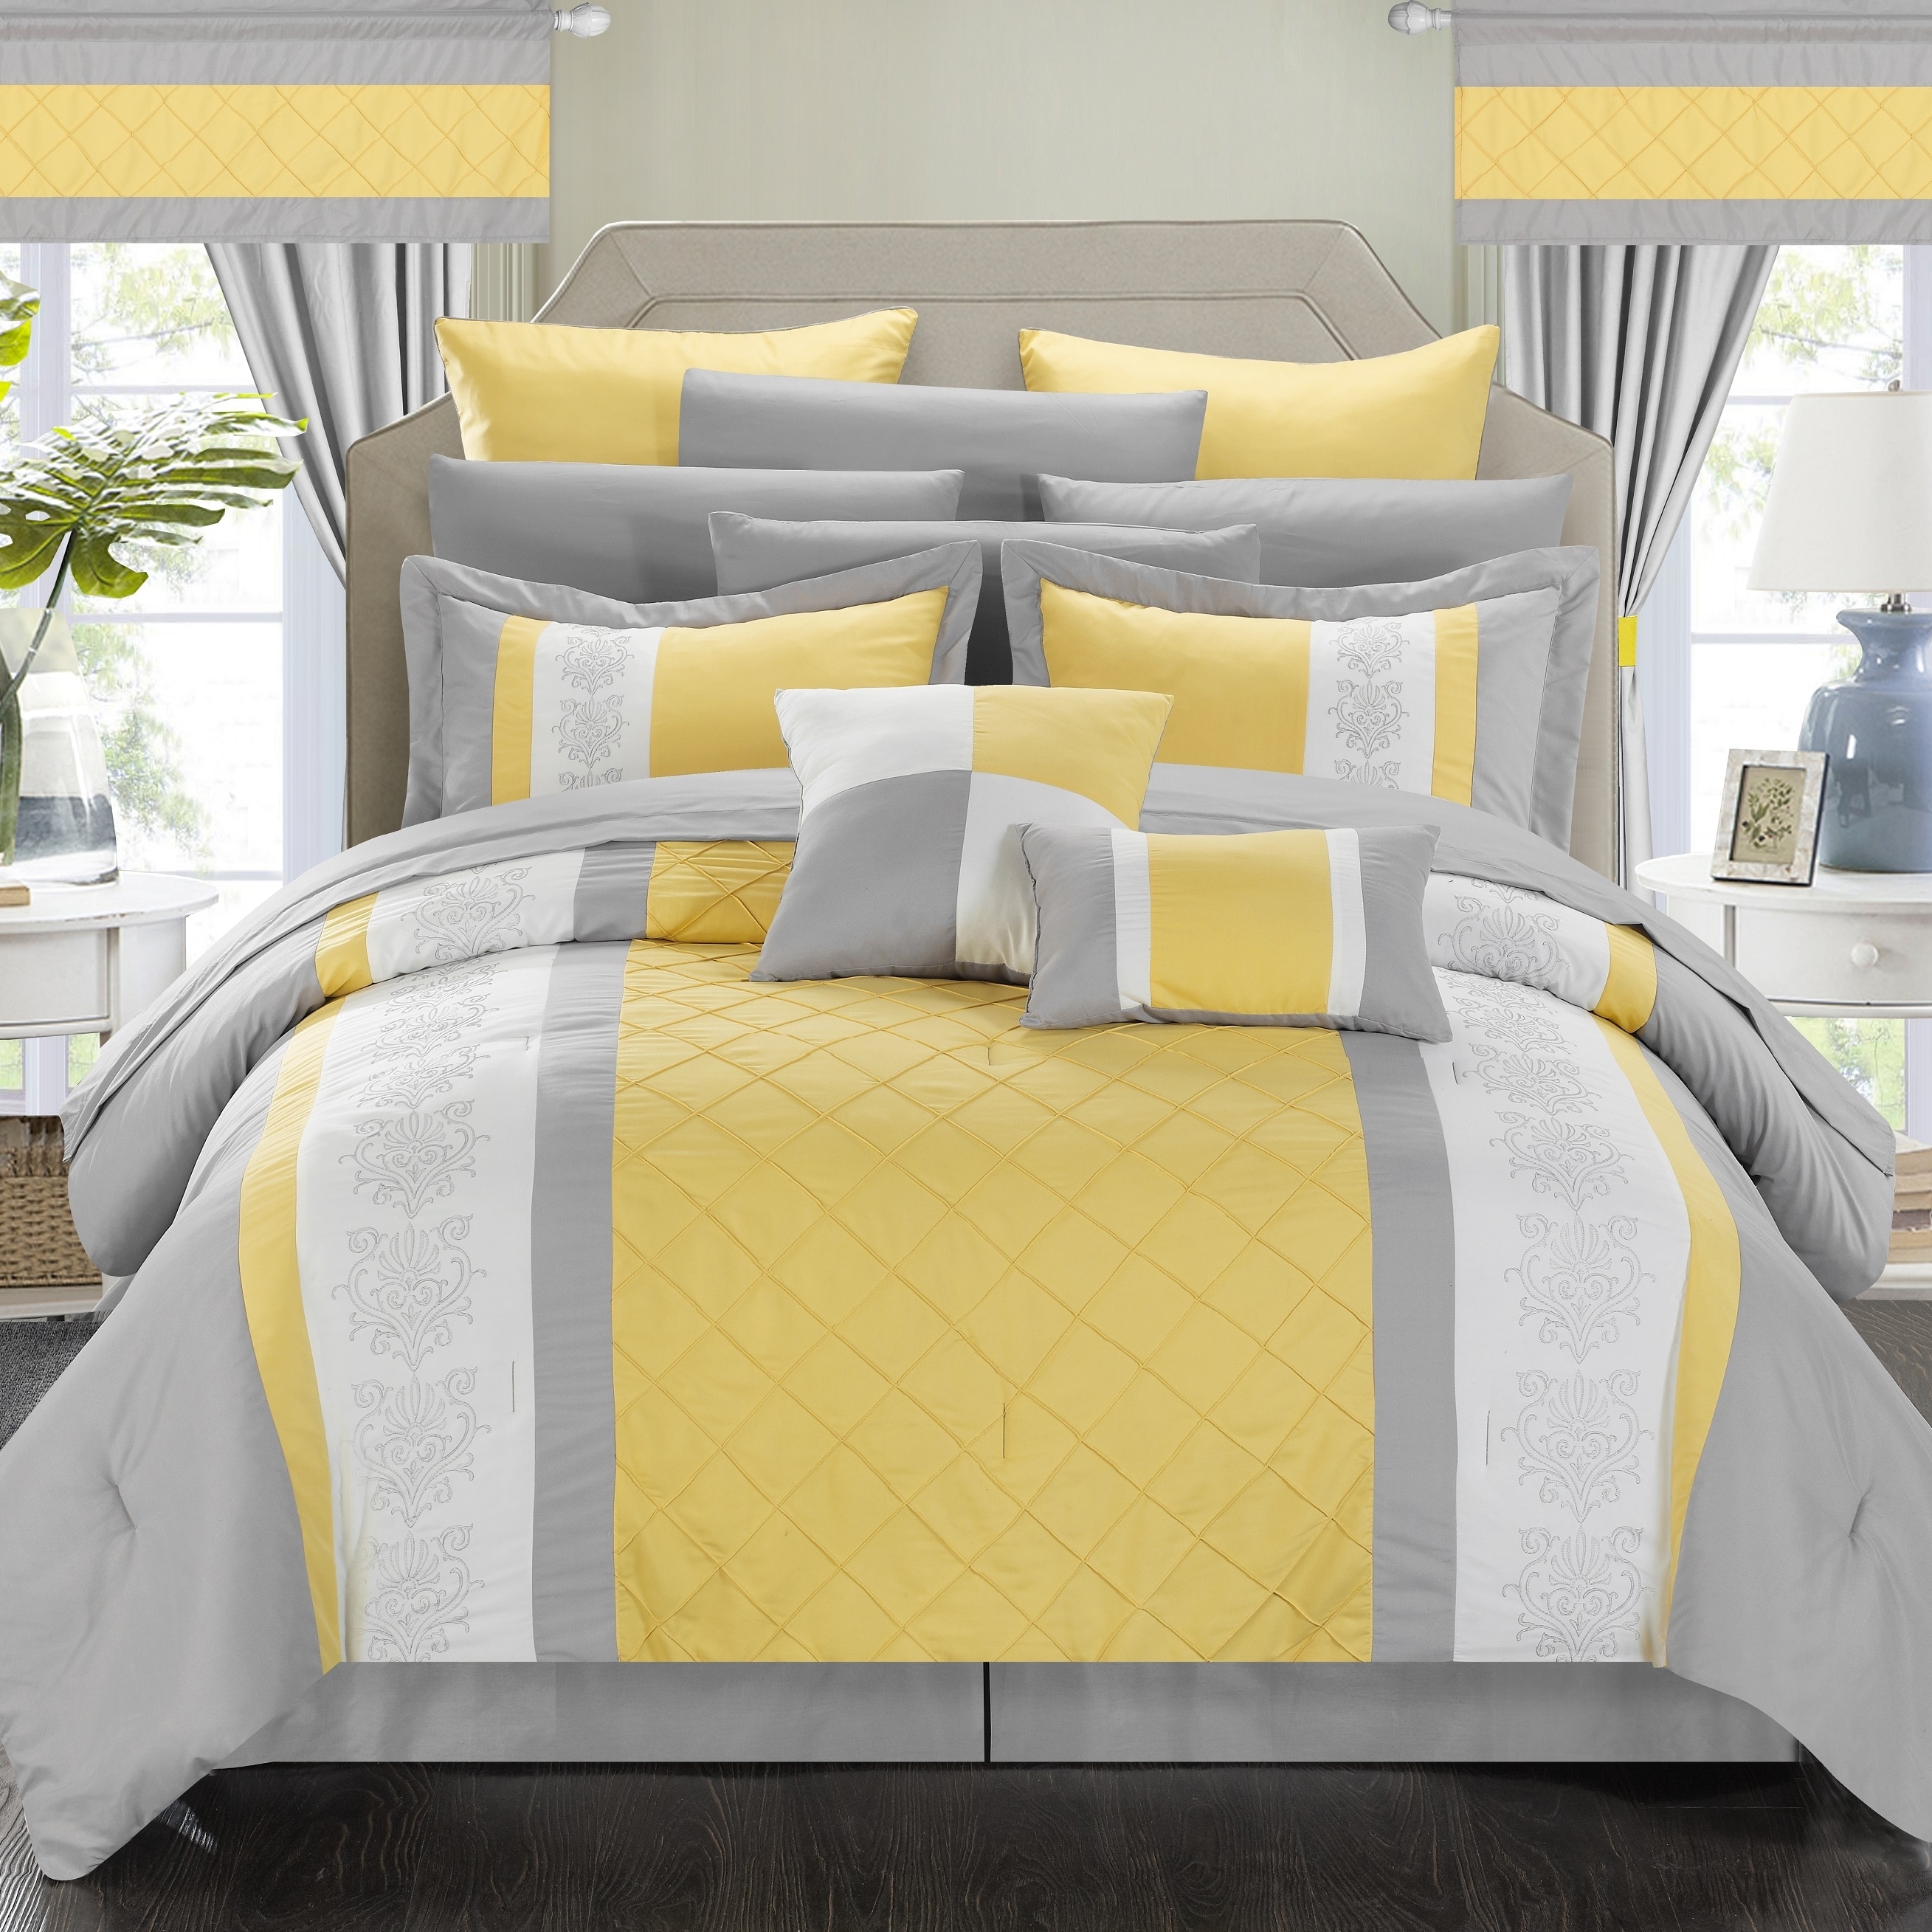 24 Piece Marlington Complete Pin Tuck Embroidery Bedding Comforter Set - Yellow, King